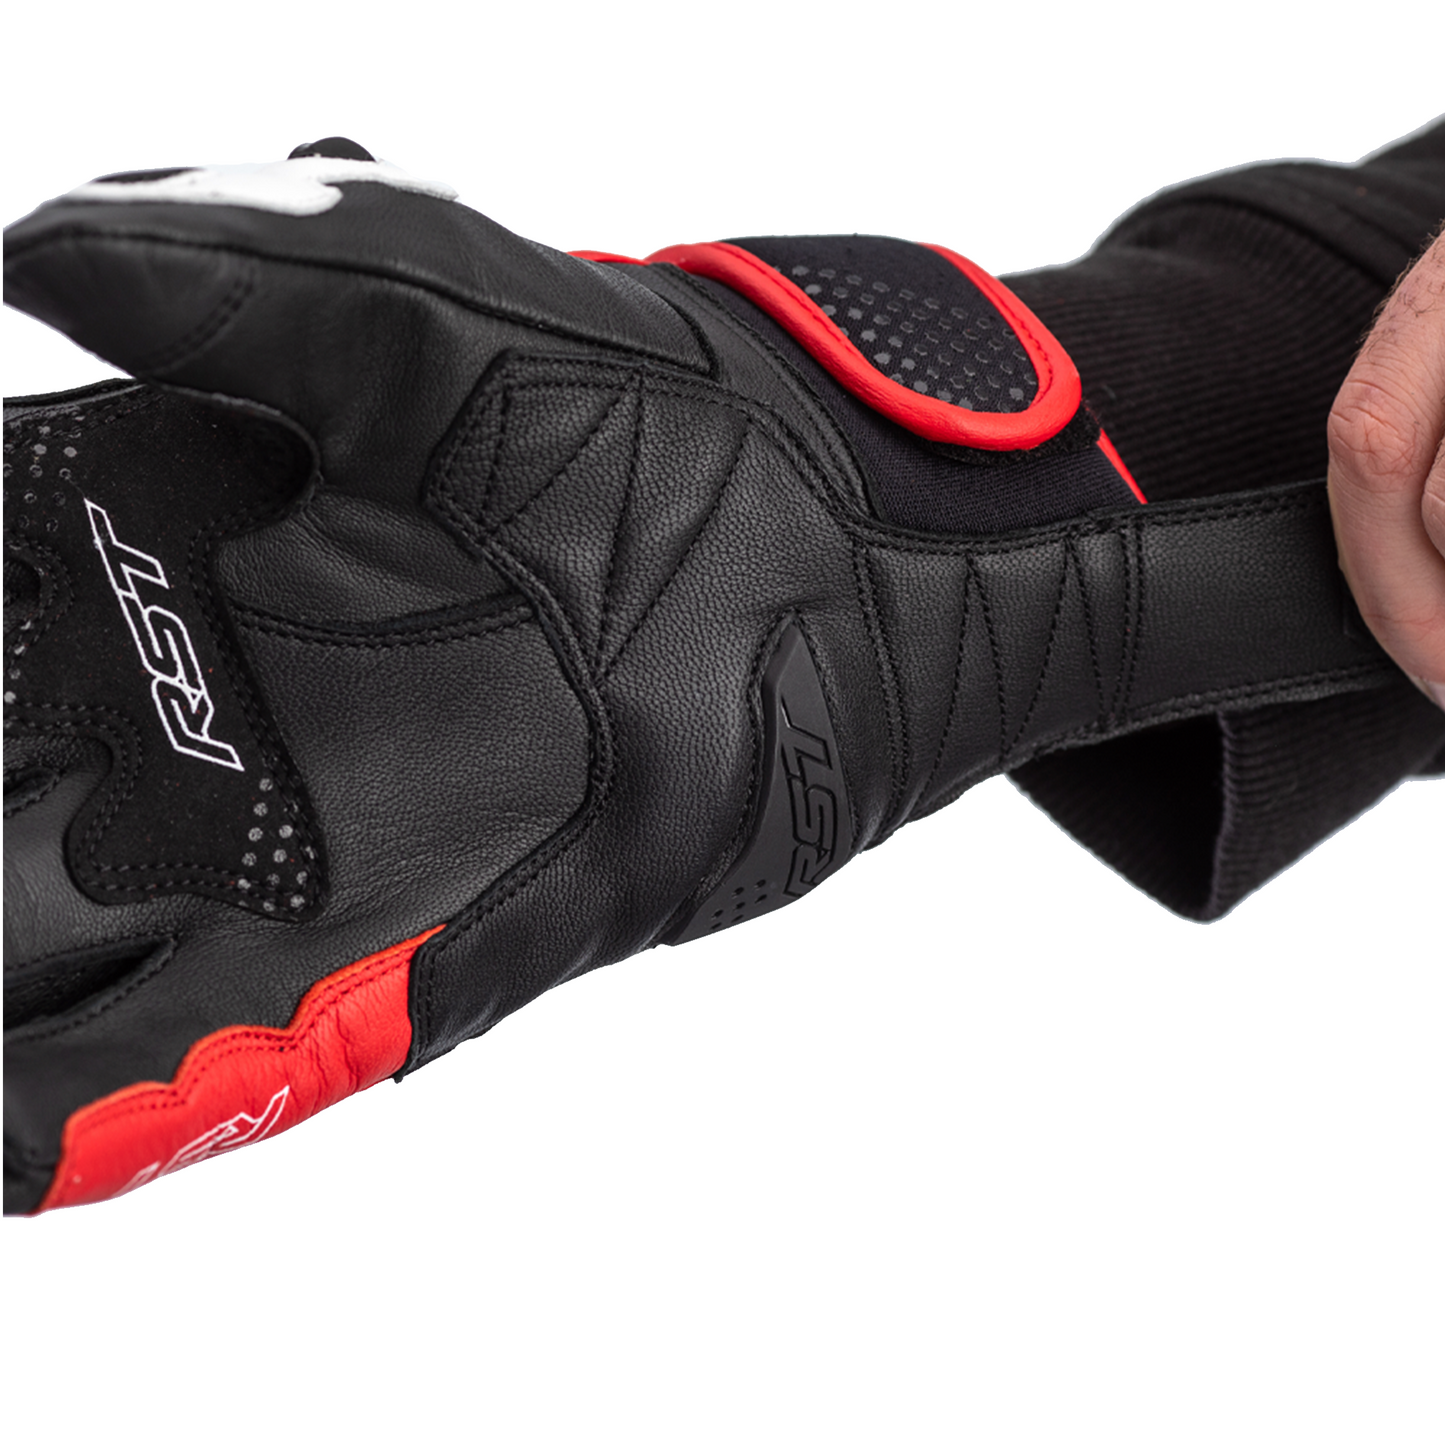 RST Freestyle 2 Leather Riding Gloves - CE APPROVED - Red